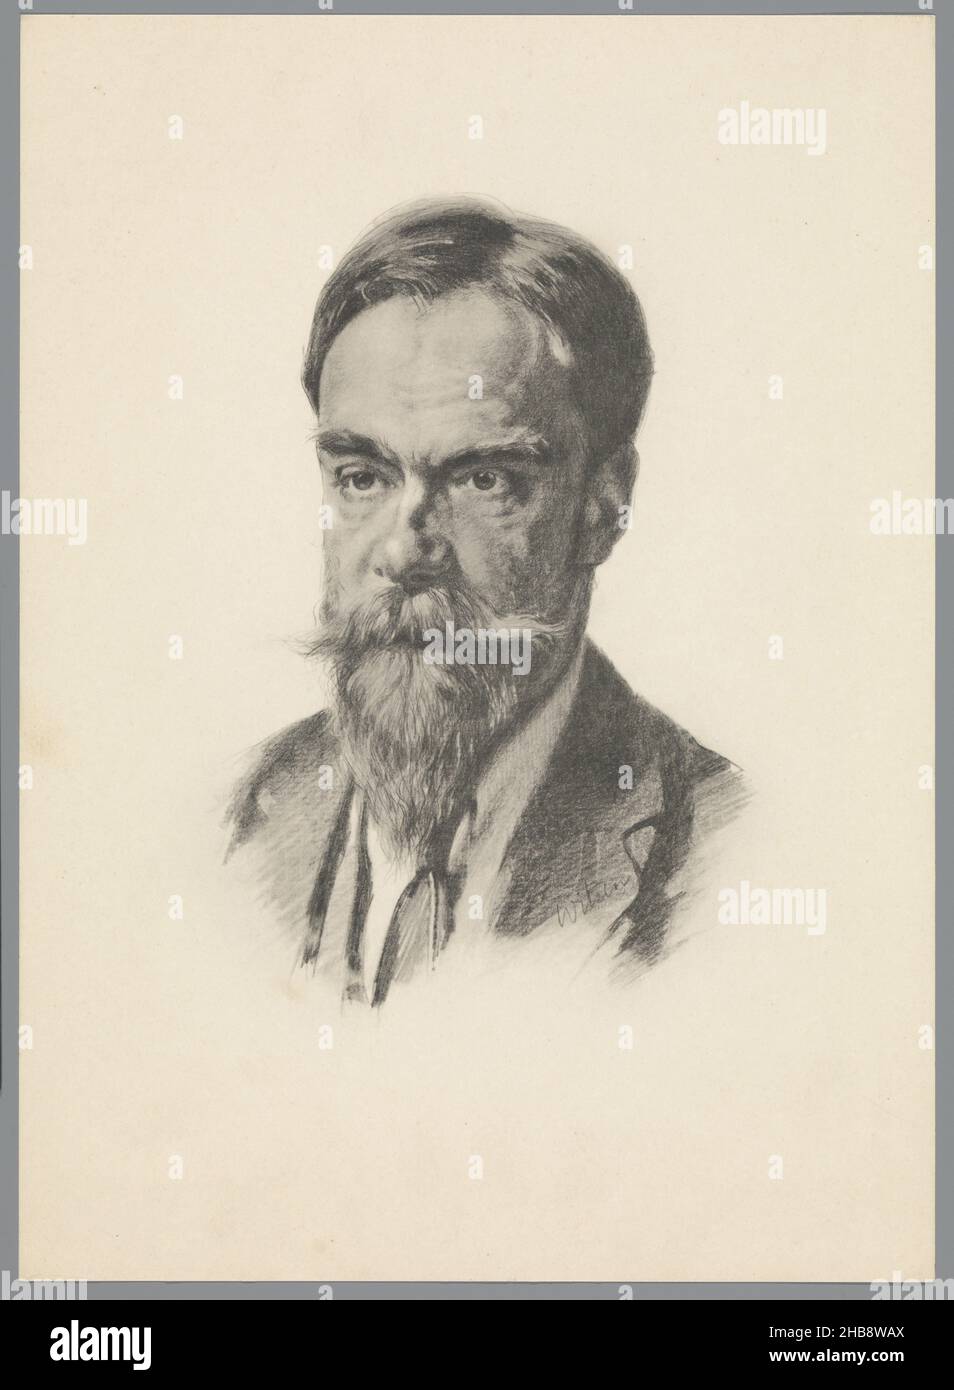 Reproduction to chalk drawing with portrait of Frans Coenen Jr., print maker: anonymous, intermediary draughtsman: Willem Witsen, Netherlands, c. 1860 - c. 1915, paper, collotype, height 359 mm × width 260 mm Stock Photo